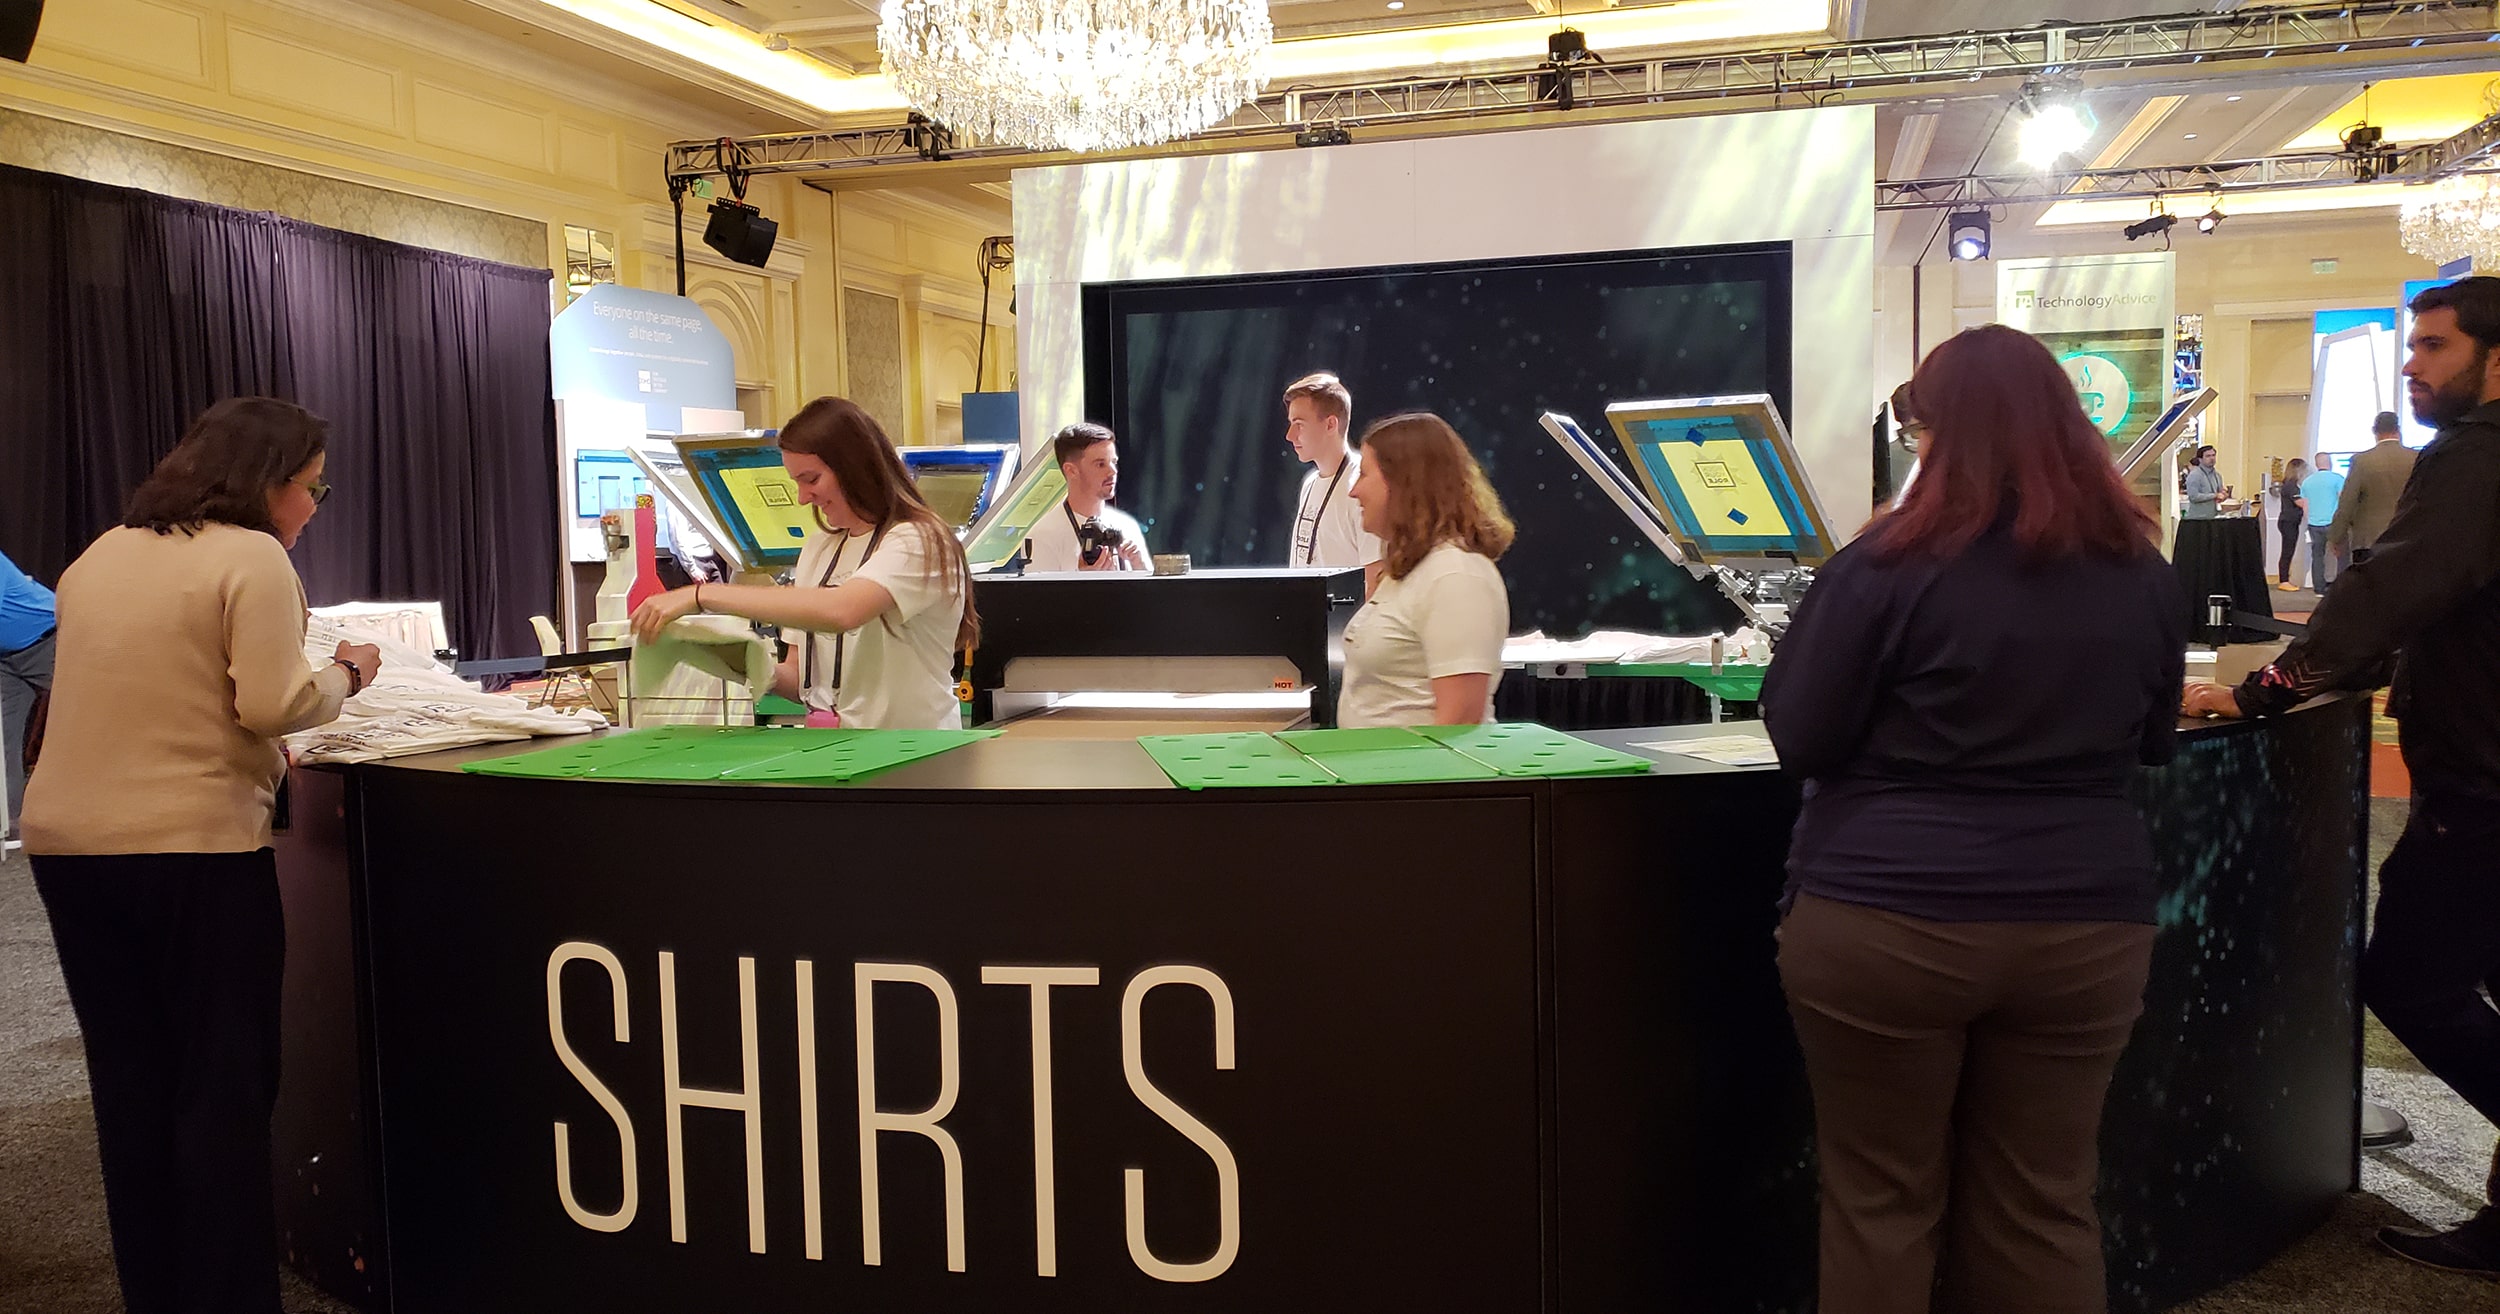 Barrel Maker staff spend time printing custom apparel for clients and live printing at events across the country.